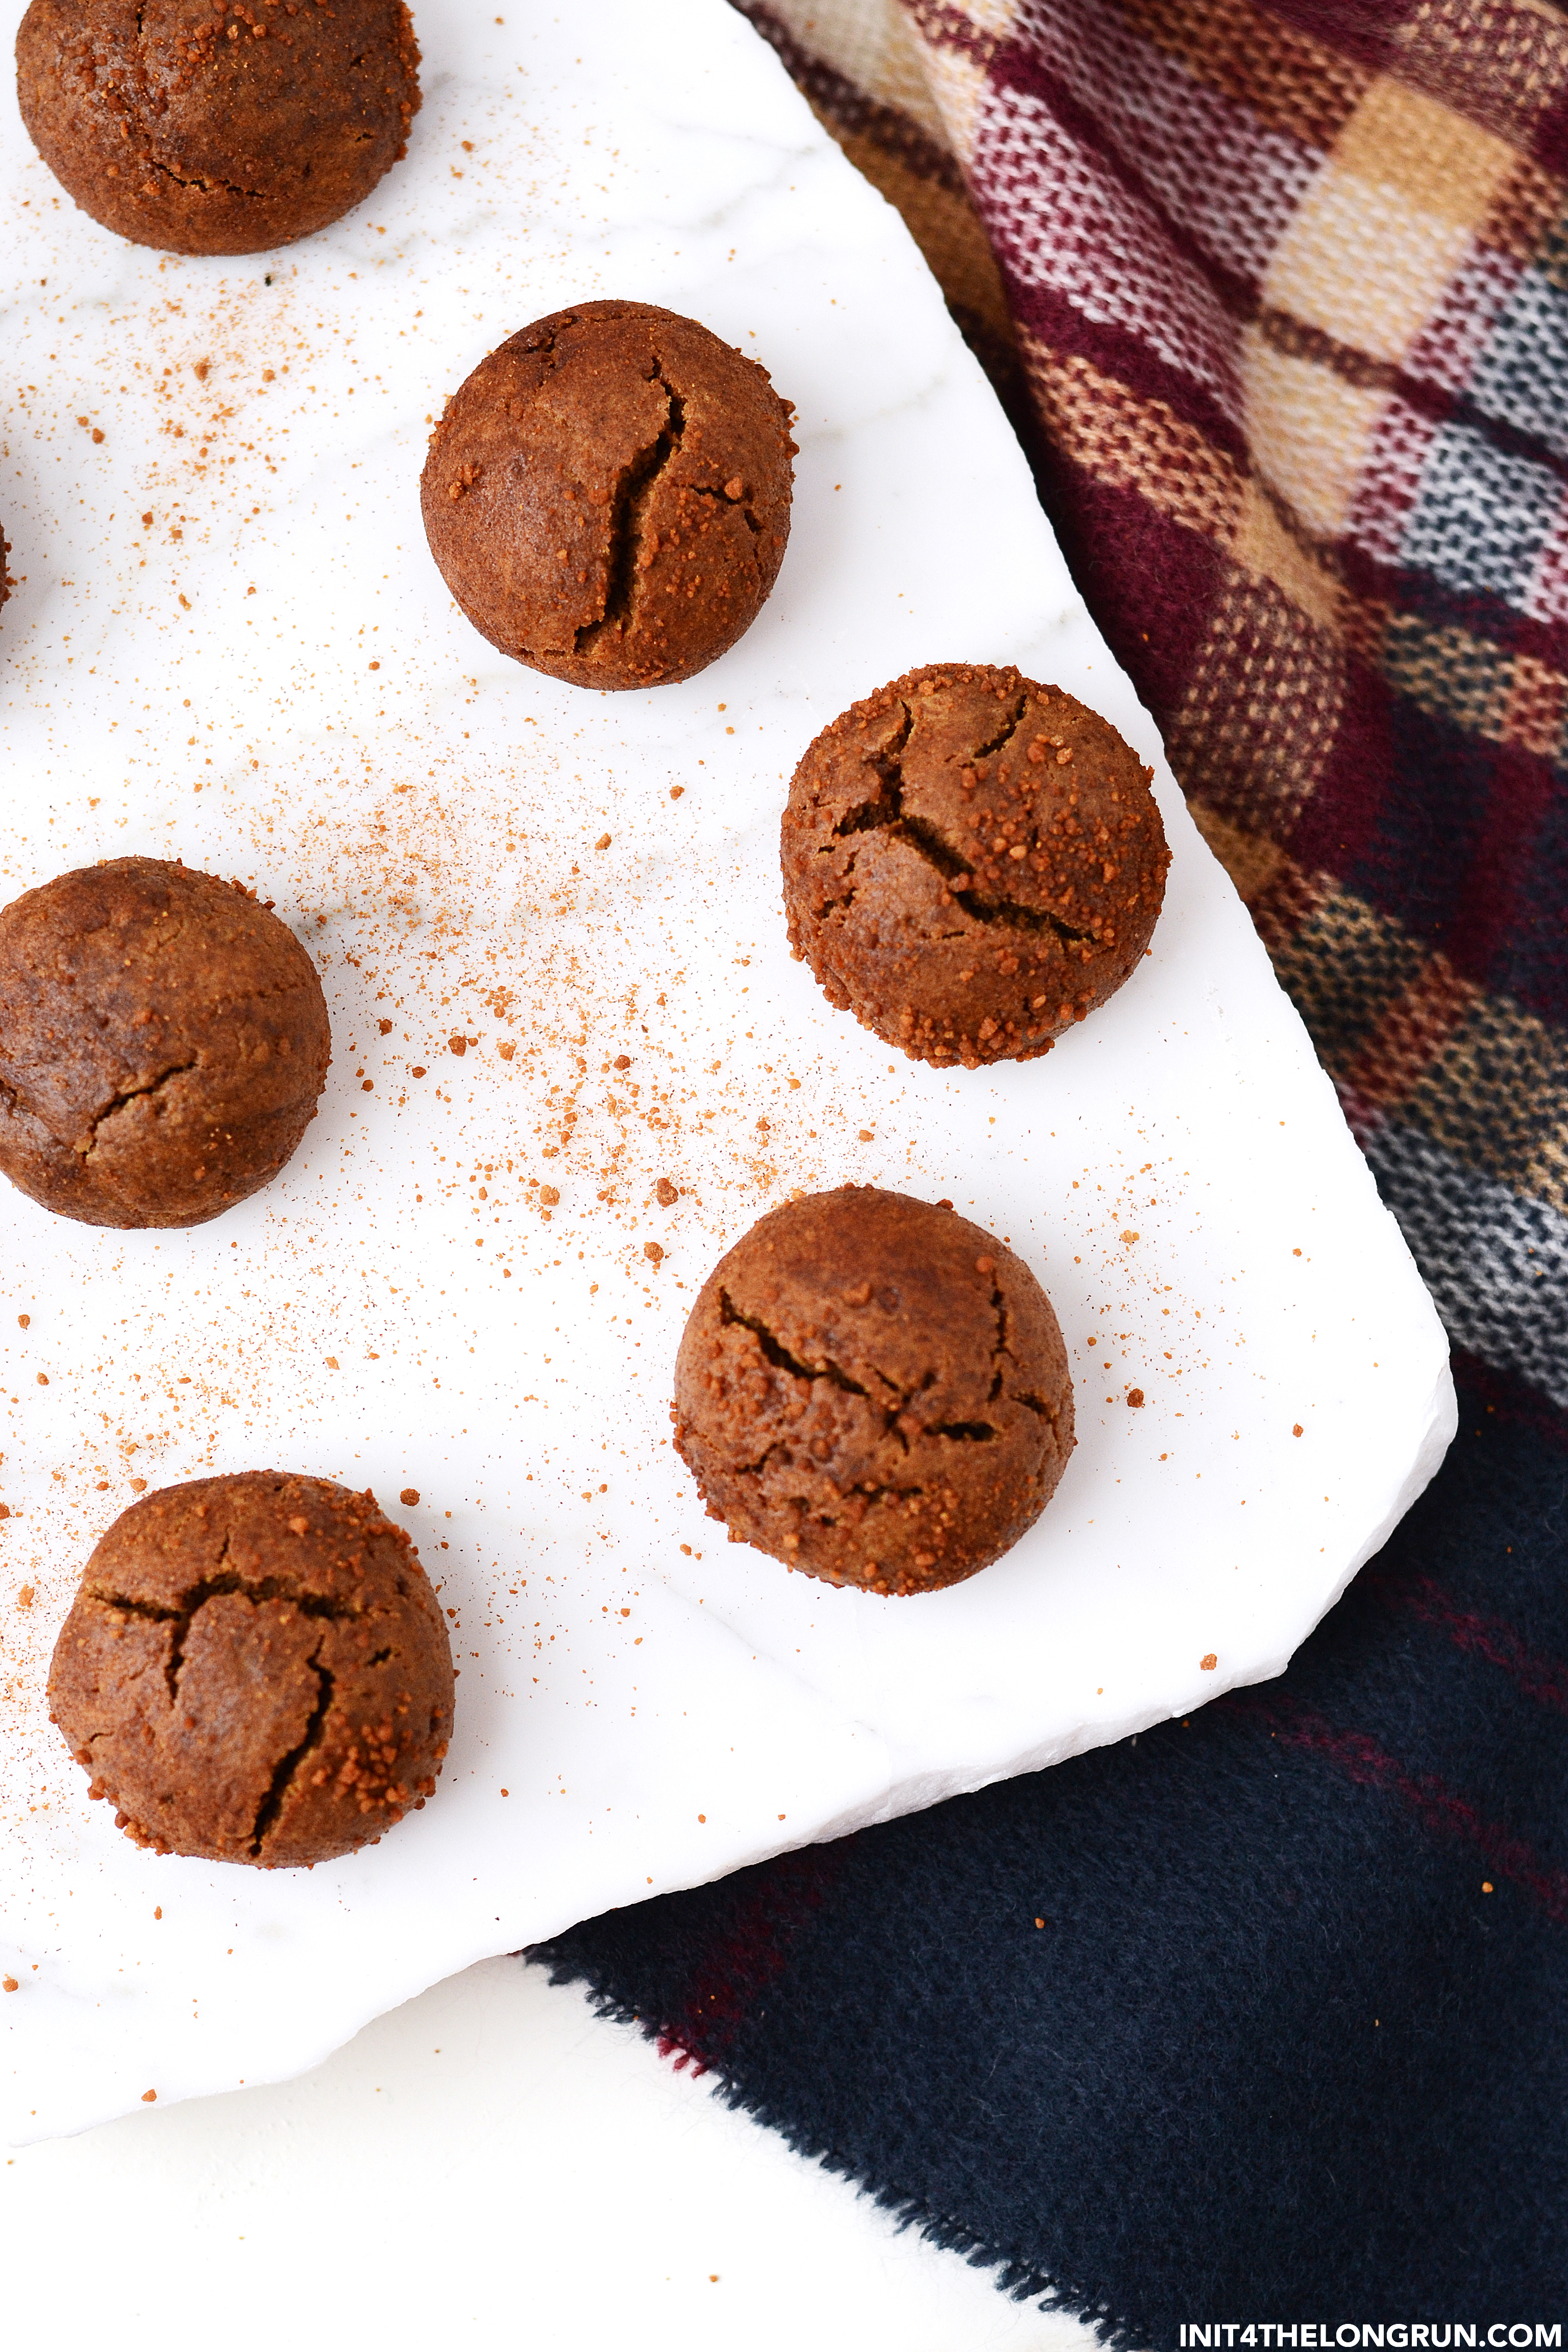 Spicy, sweet gingerbread meets chewy cinnamon snickerdoodles in these delectable bite-sized holiday cookies covered in coconut sugar.